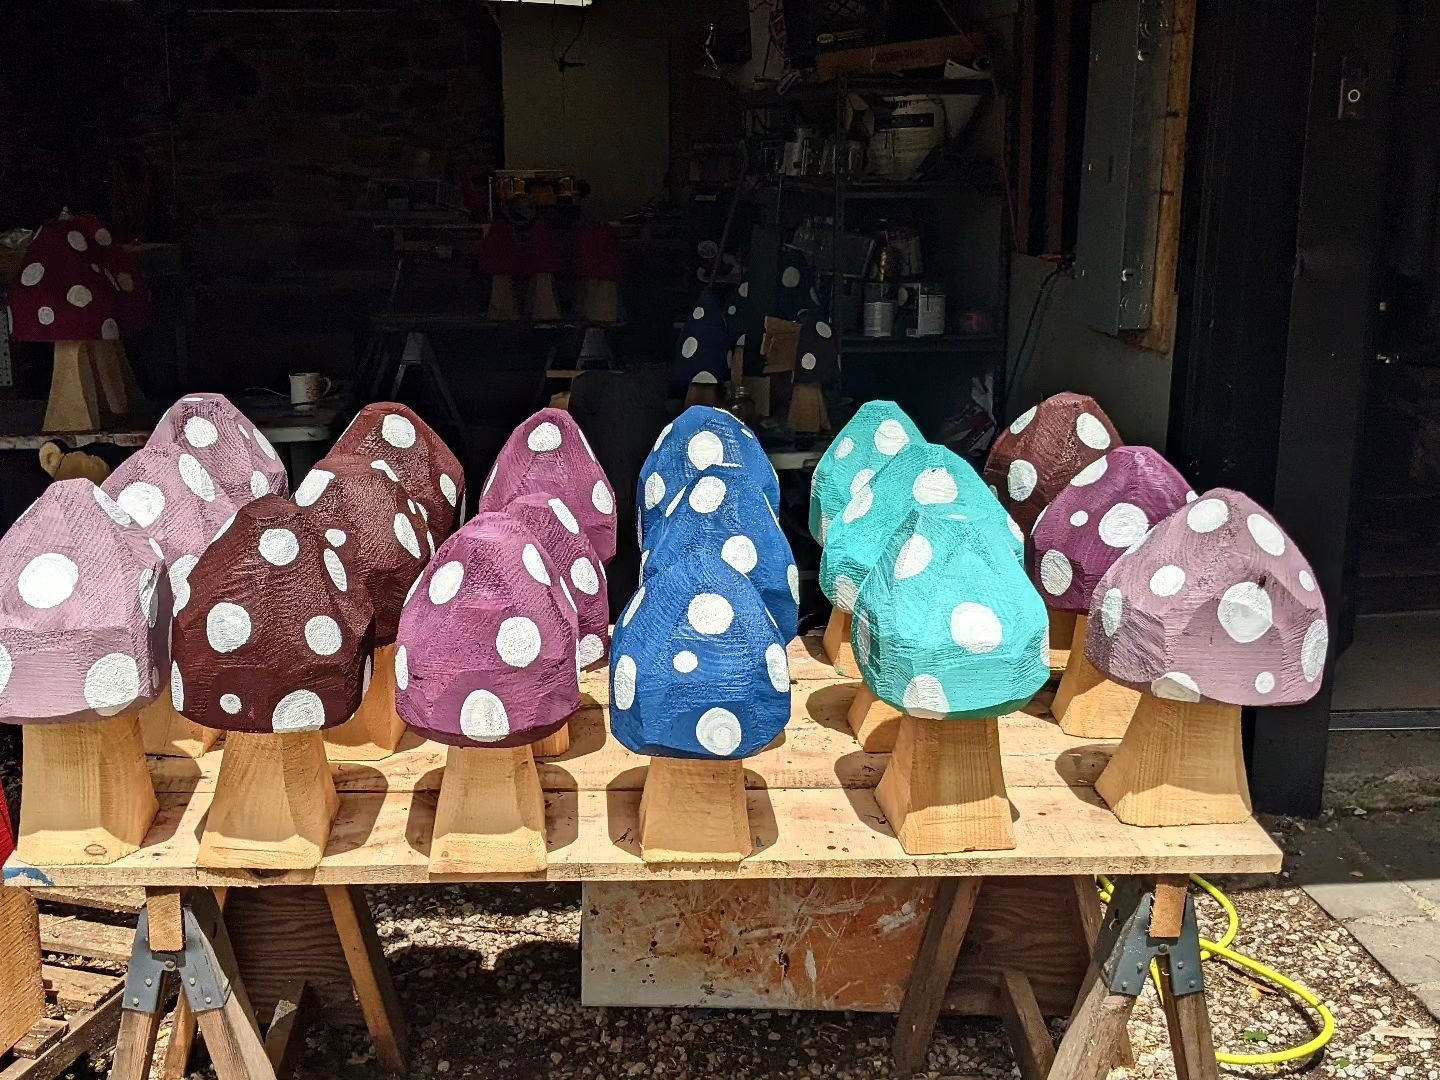 @oldreddingfarm has done such a great job painting these mushrooms to be ready for this weekend, so cute!